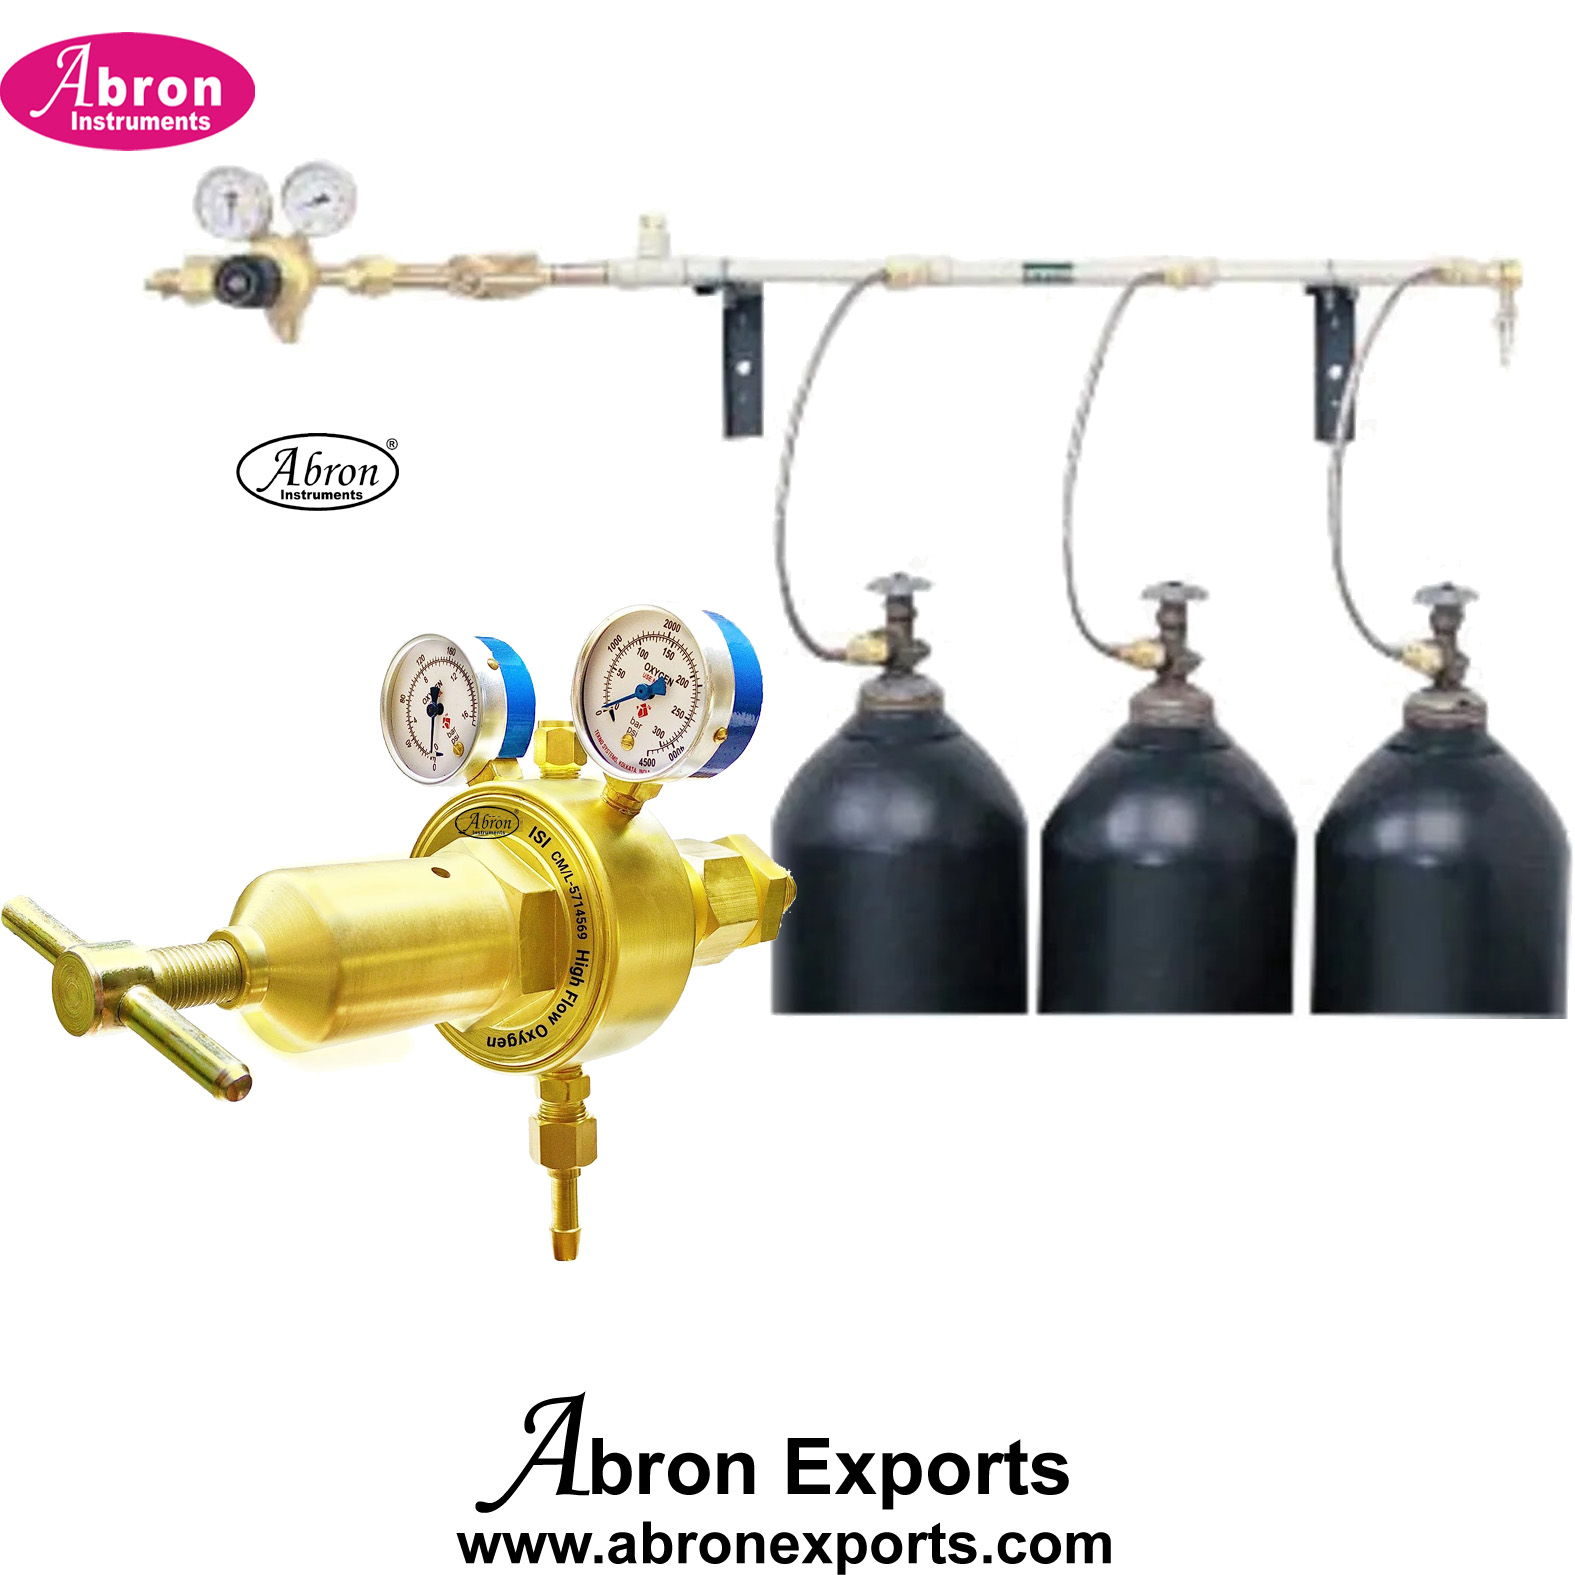 Medical Gas Pipe lIne Cylinder manifold controller with cylinder setup controllers set Abron ABM-1123MF3 